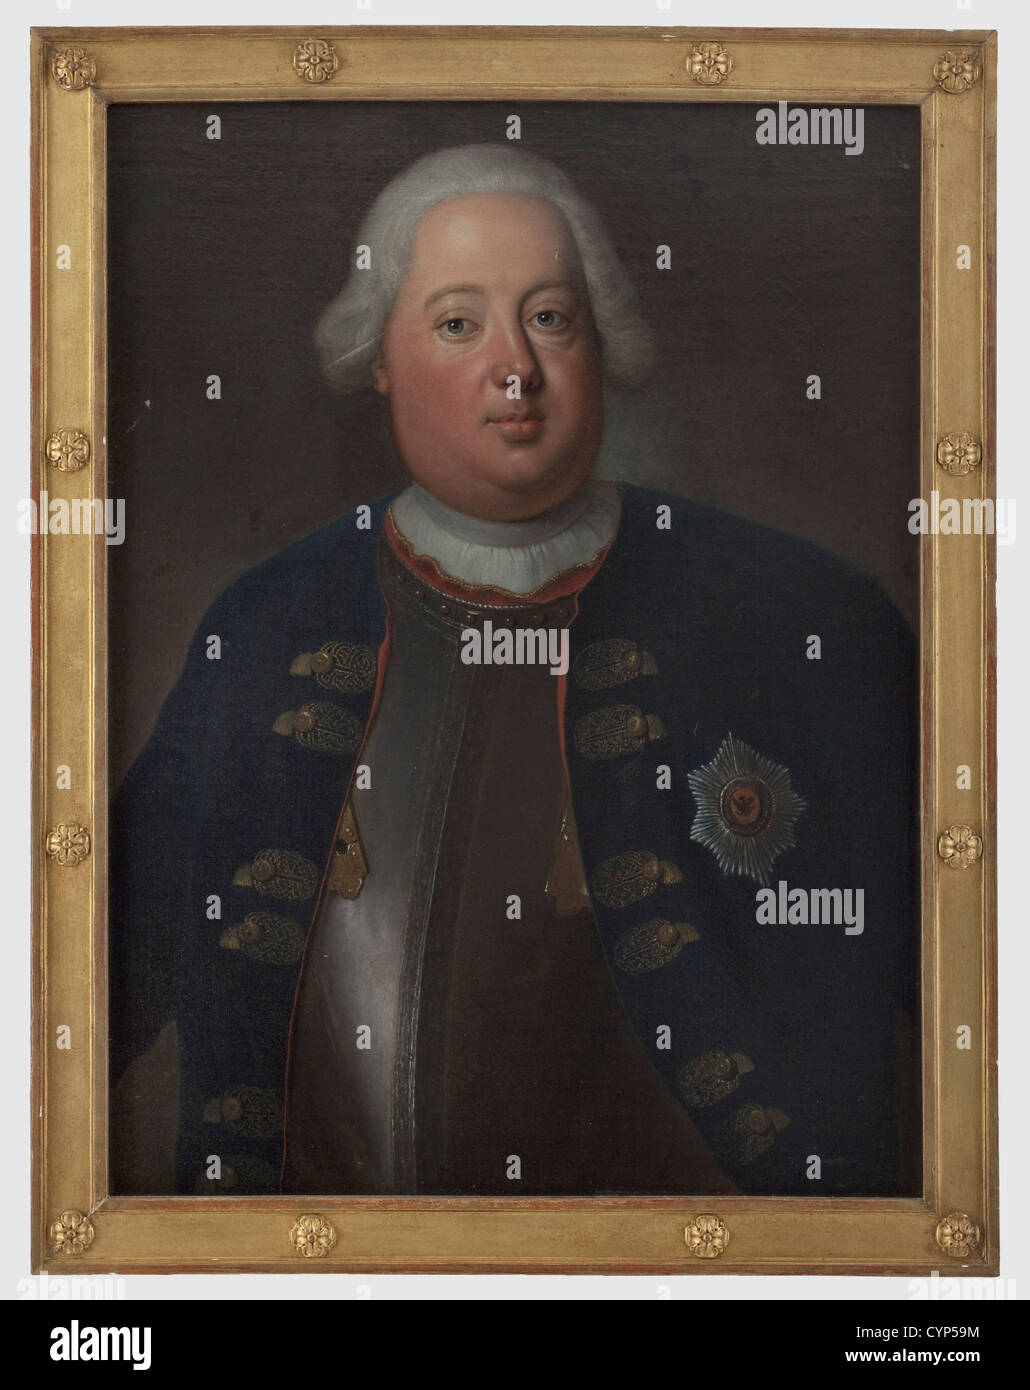 A King Frederick William I (1688 - 1740) - Portrait, Oil on canvas, picture dimensions 54 x 73 cm, unsigned. Small restored area on the temple. A high quality, newly framed half-length representation of the 'Soldier King' in the uniform of Grenadier Regiment Graf Kleist von Nollendorf (1. West Prussian) Nr. 6, with cuirass and the Star of the Order of the Black Eagle. A contemporary detail after the 1729 original by Antoine Pesne depicting the king in 1715 during the Siege of Stralsund, people, 18th century, Prussian, Prussia, German, Germany, militaria, milita, Stock Photo